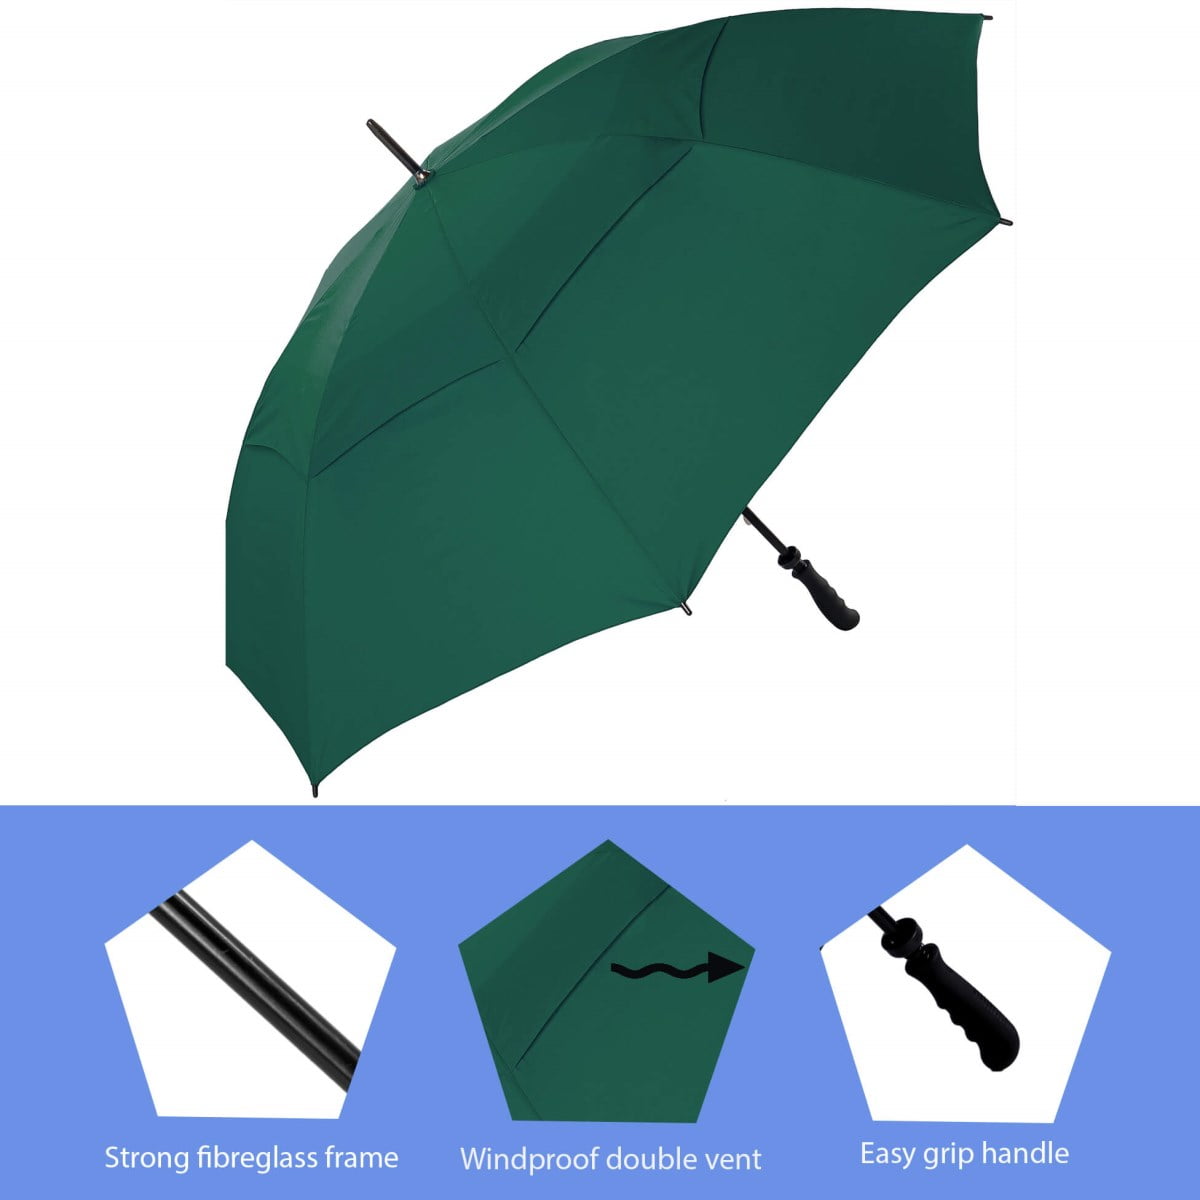 Infographic showing features of Green Vented Golf Umbrella - Windproof